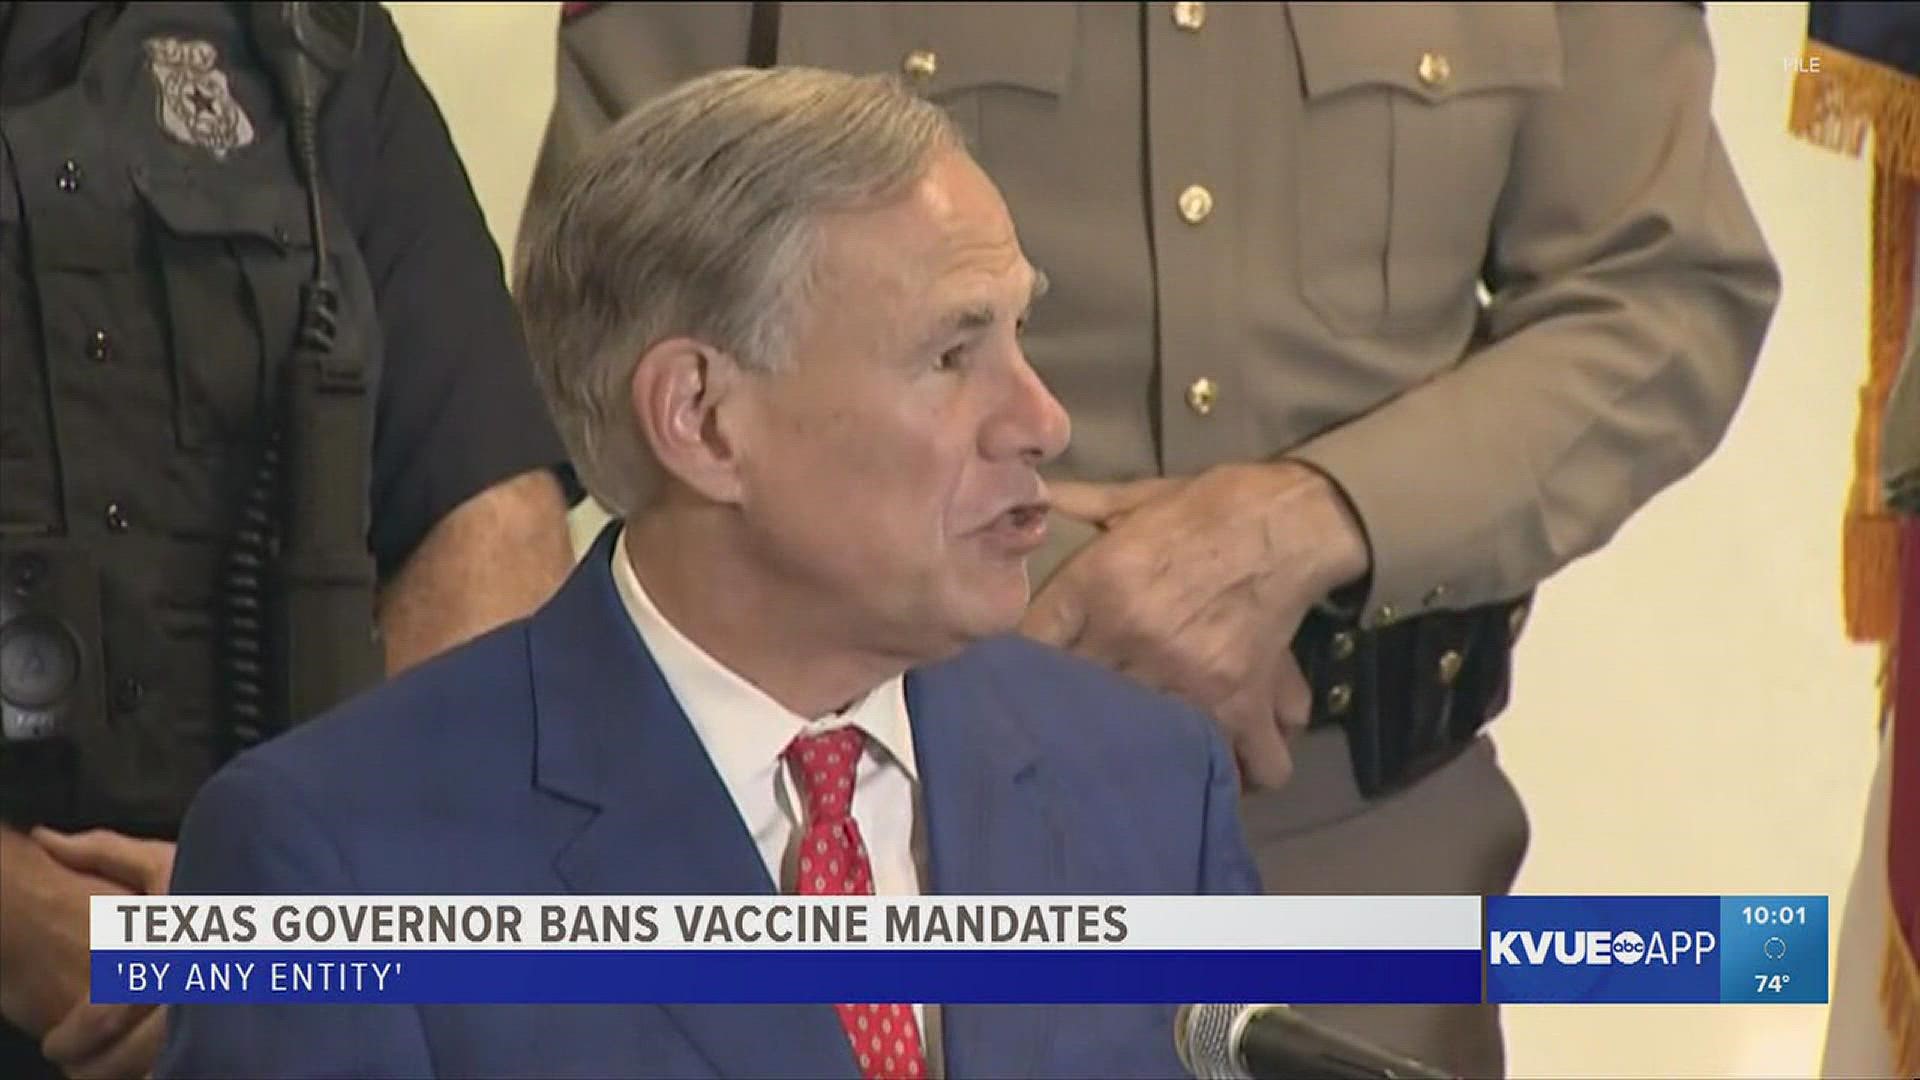 A new executive order from Gov. Greg Abbott bans COVID-19 vaccine mandates by any entity in Texas.